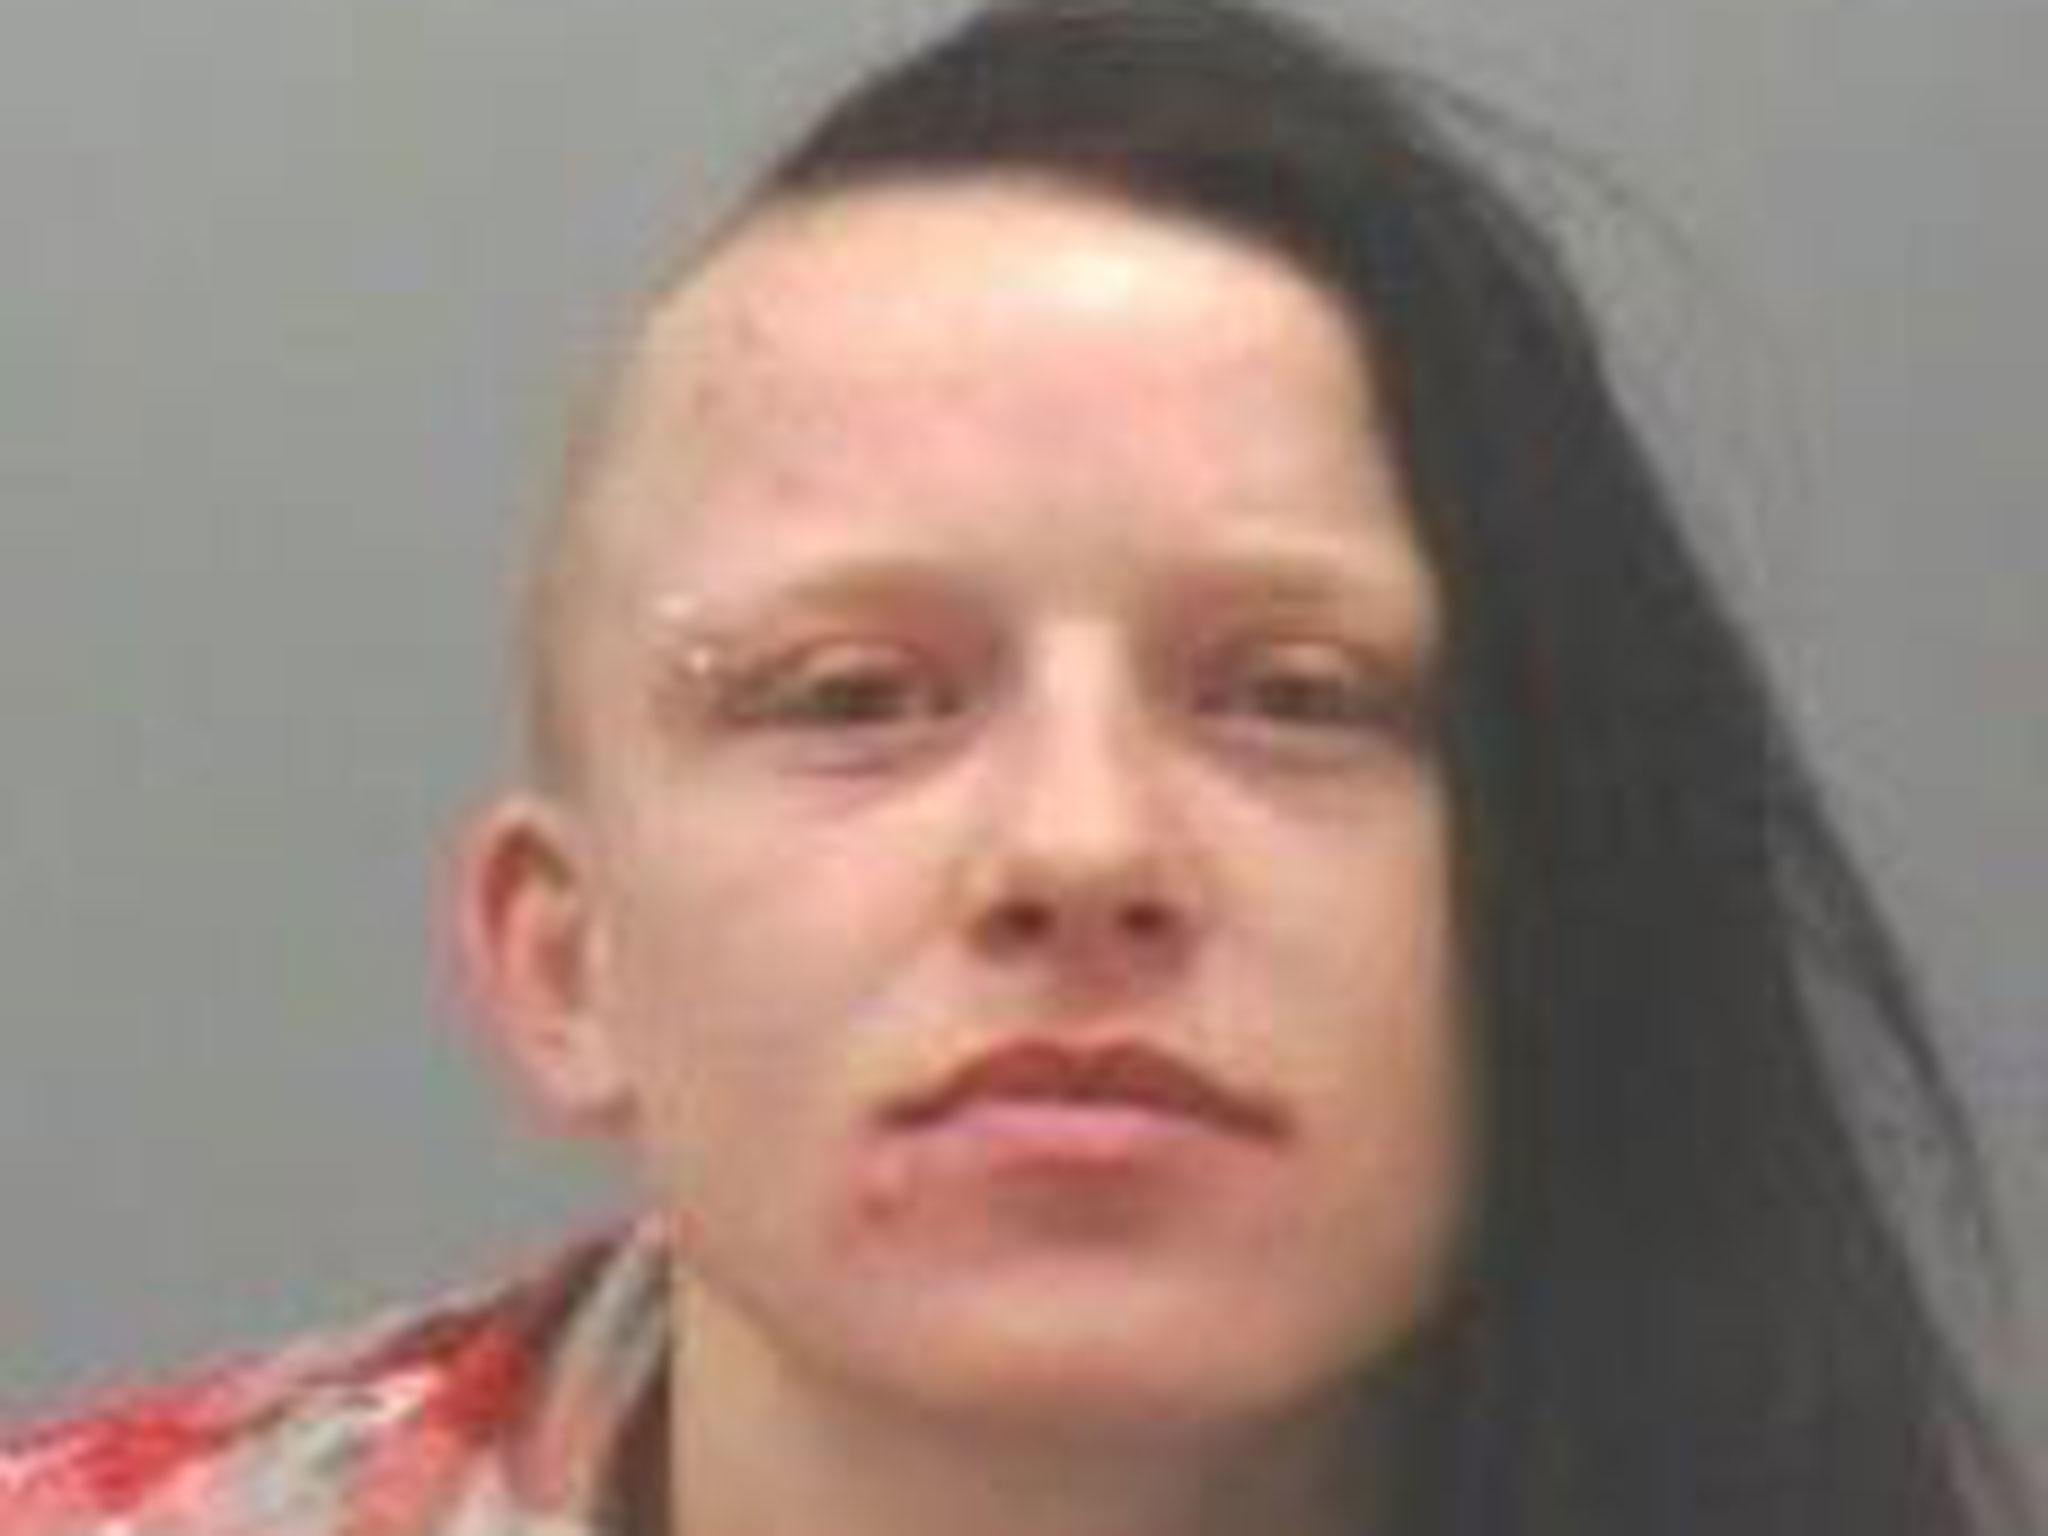 Carolann Gallon was jailed for six years after pleading guilty to three counts of trafficking for sexual exploitation